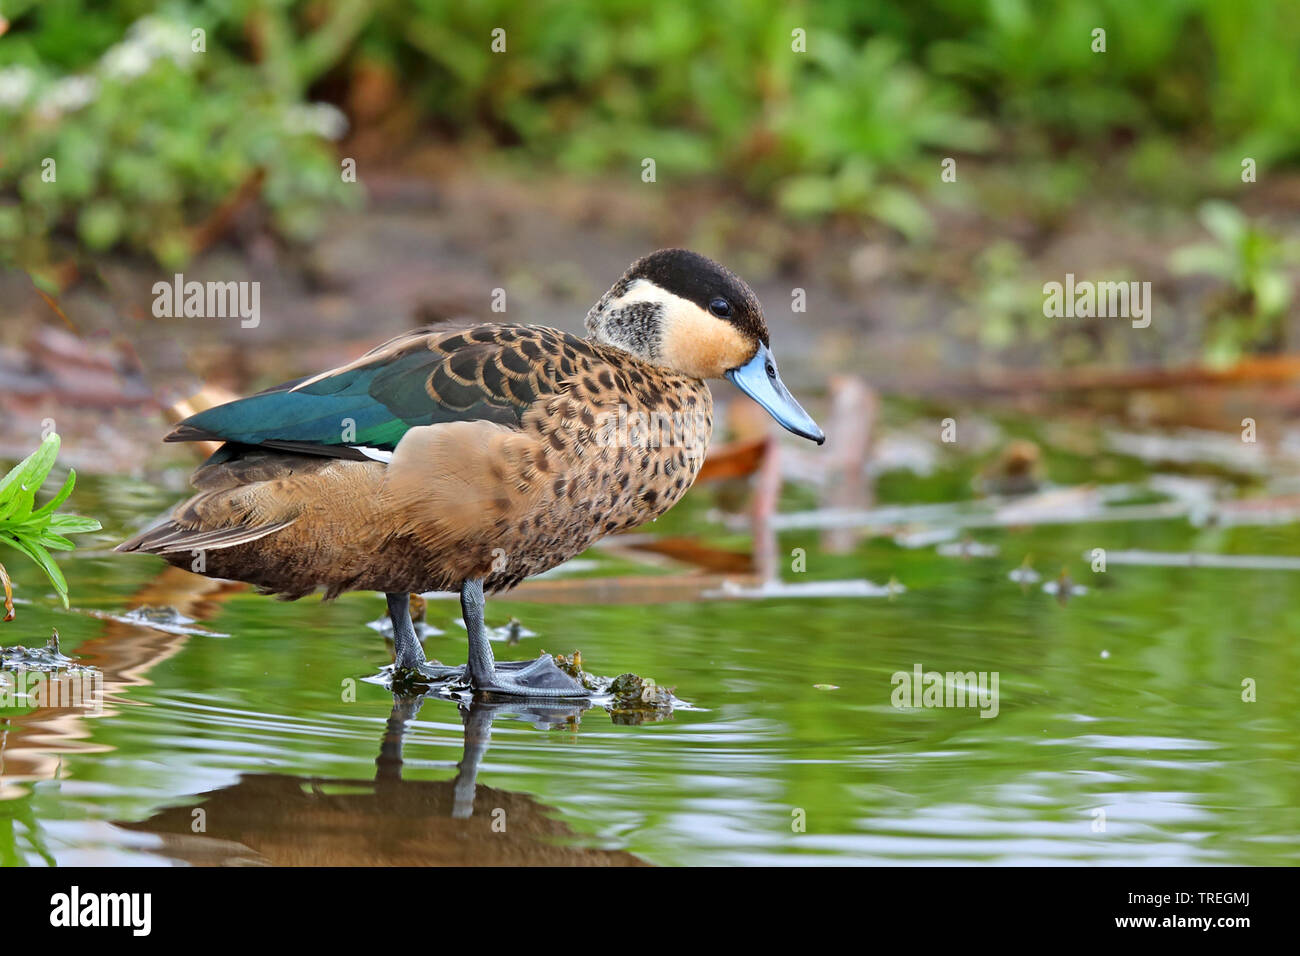 hottentot teal (Anas punctata), standing in water, South Africa, Marievale Bird Sanctury Stock Photo